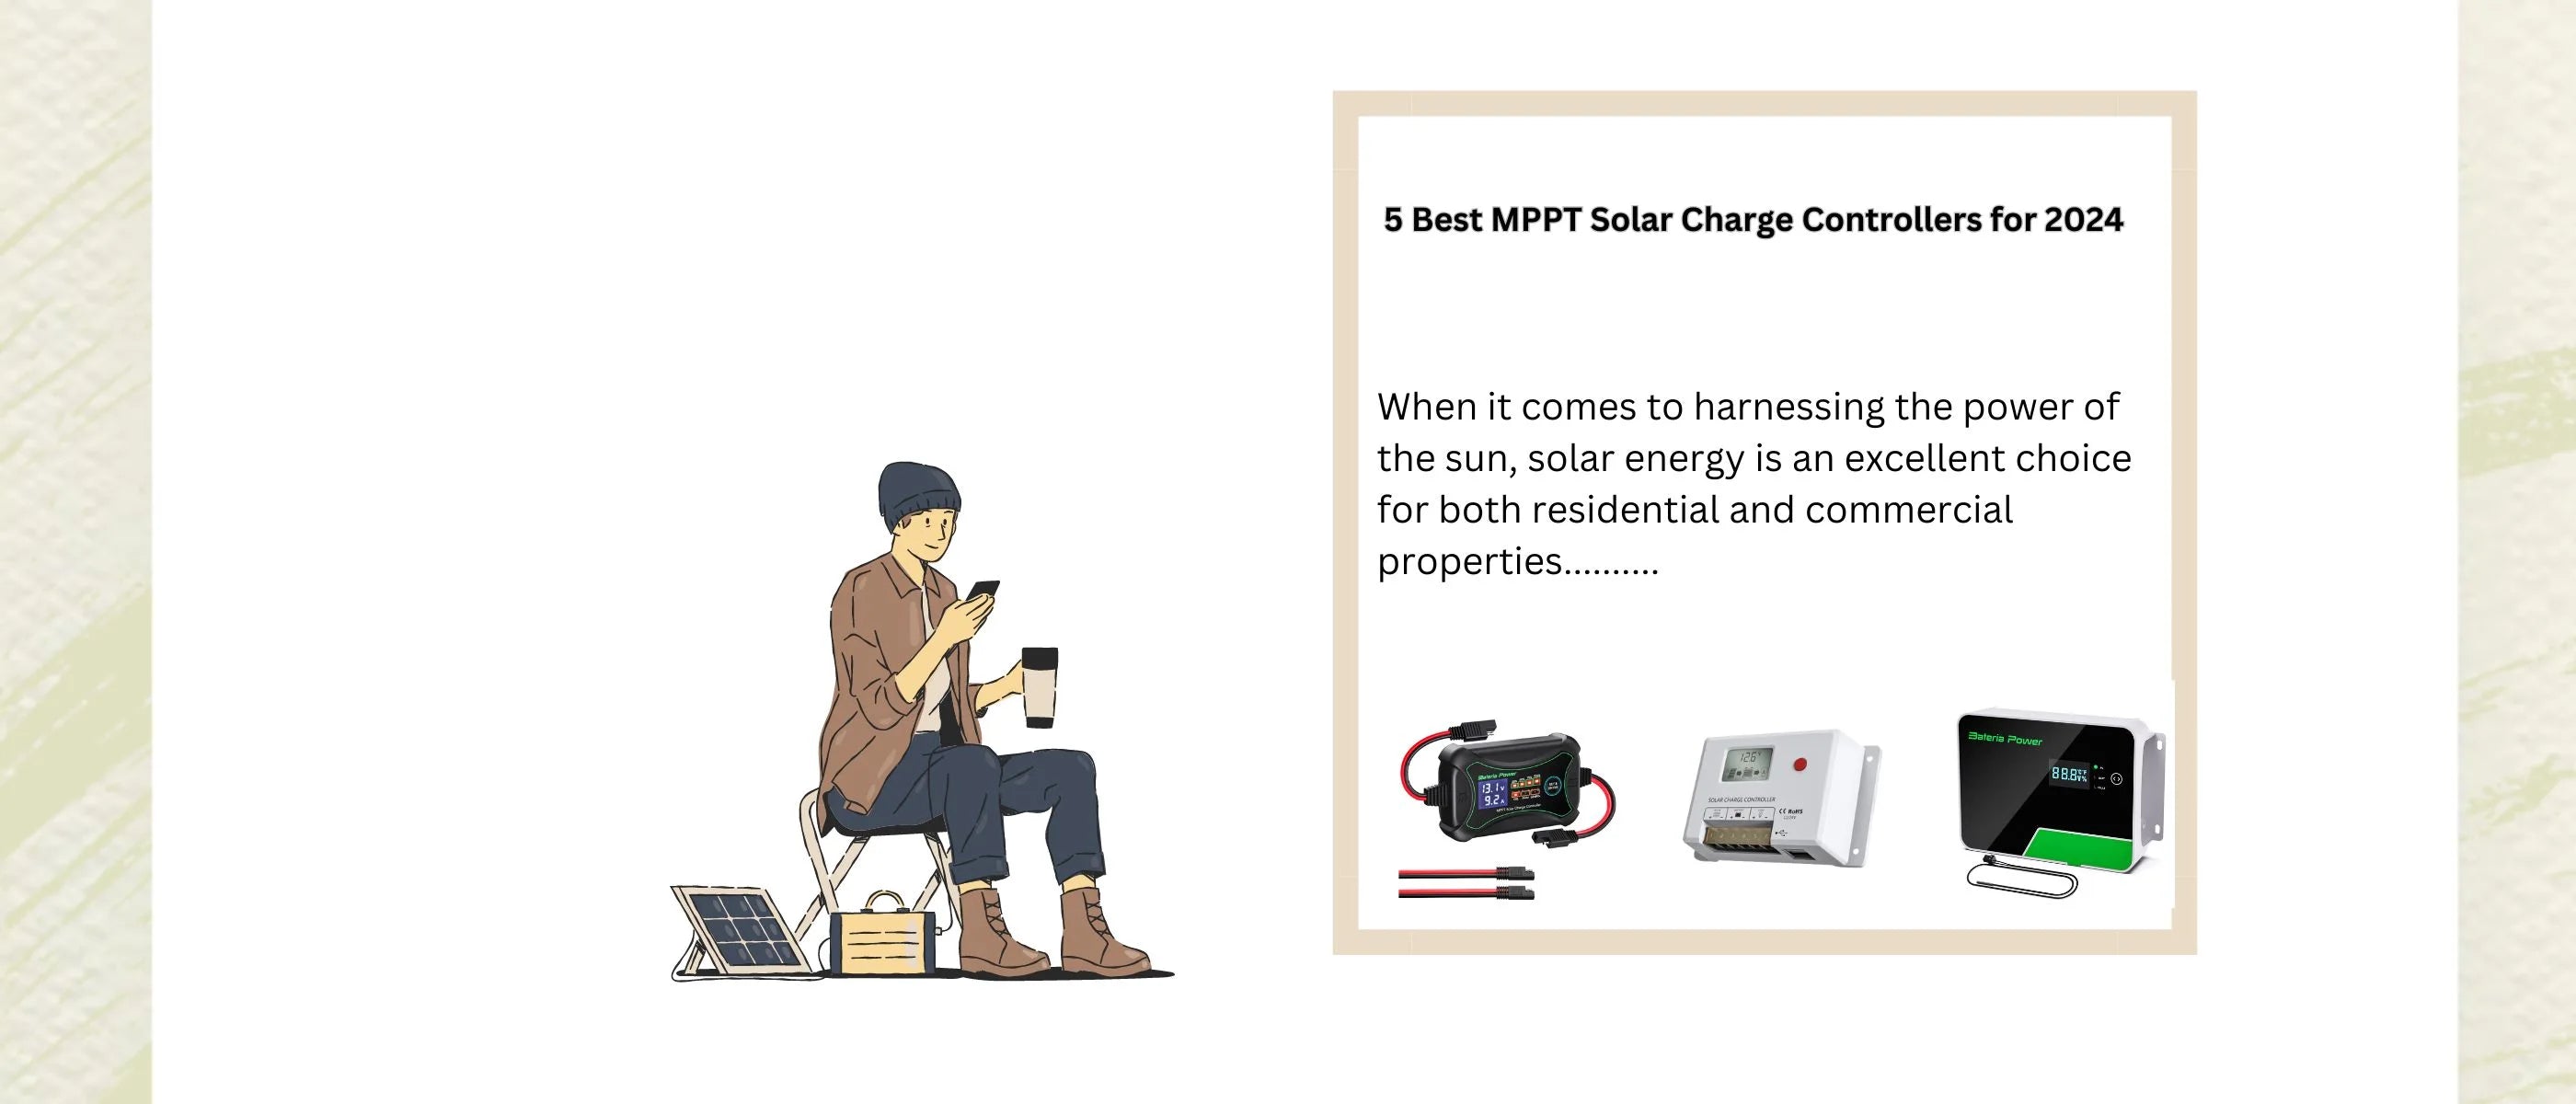 5 Best MPPT Solar Charge Controllers for 2024